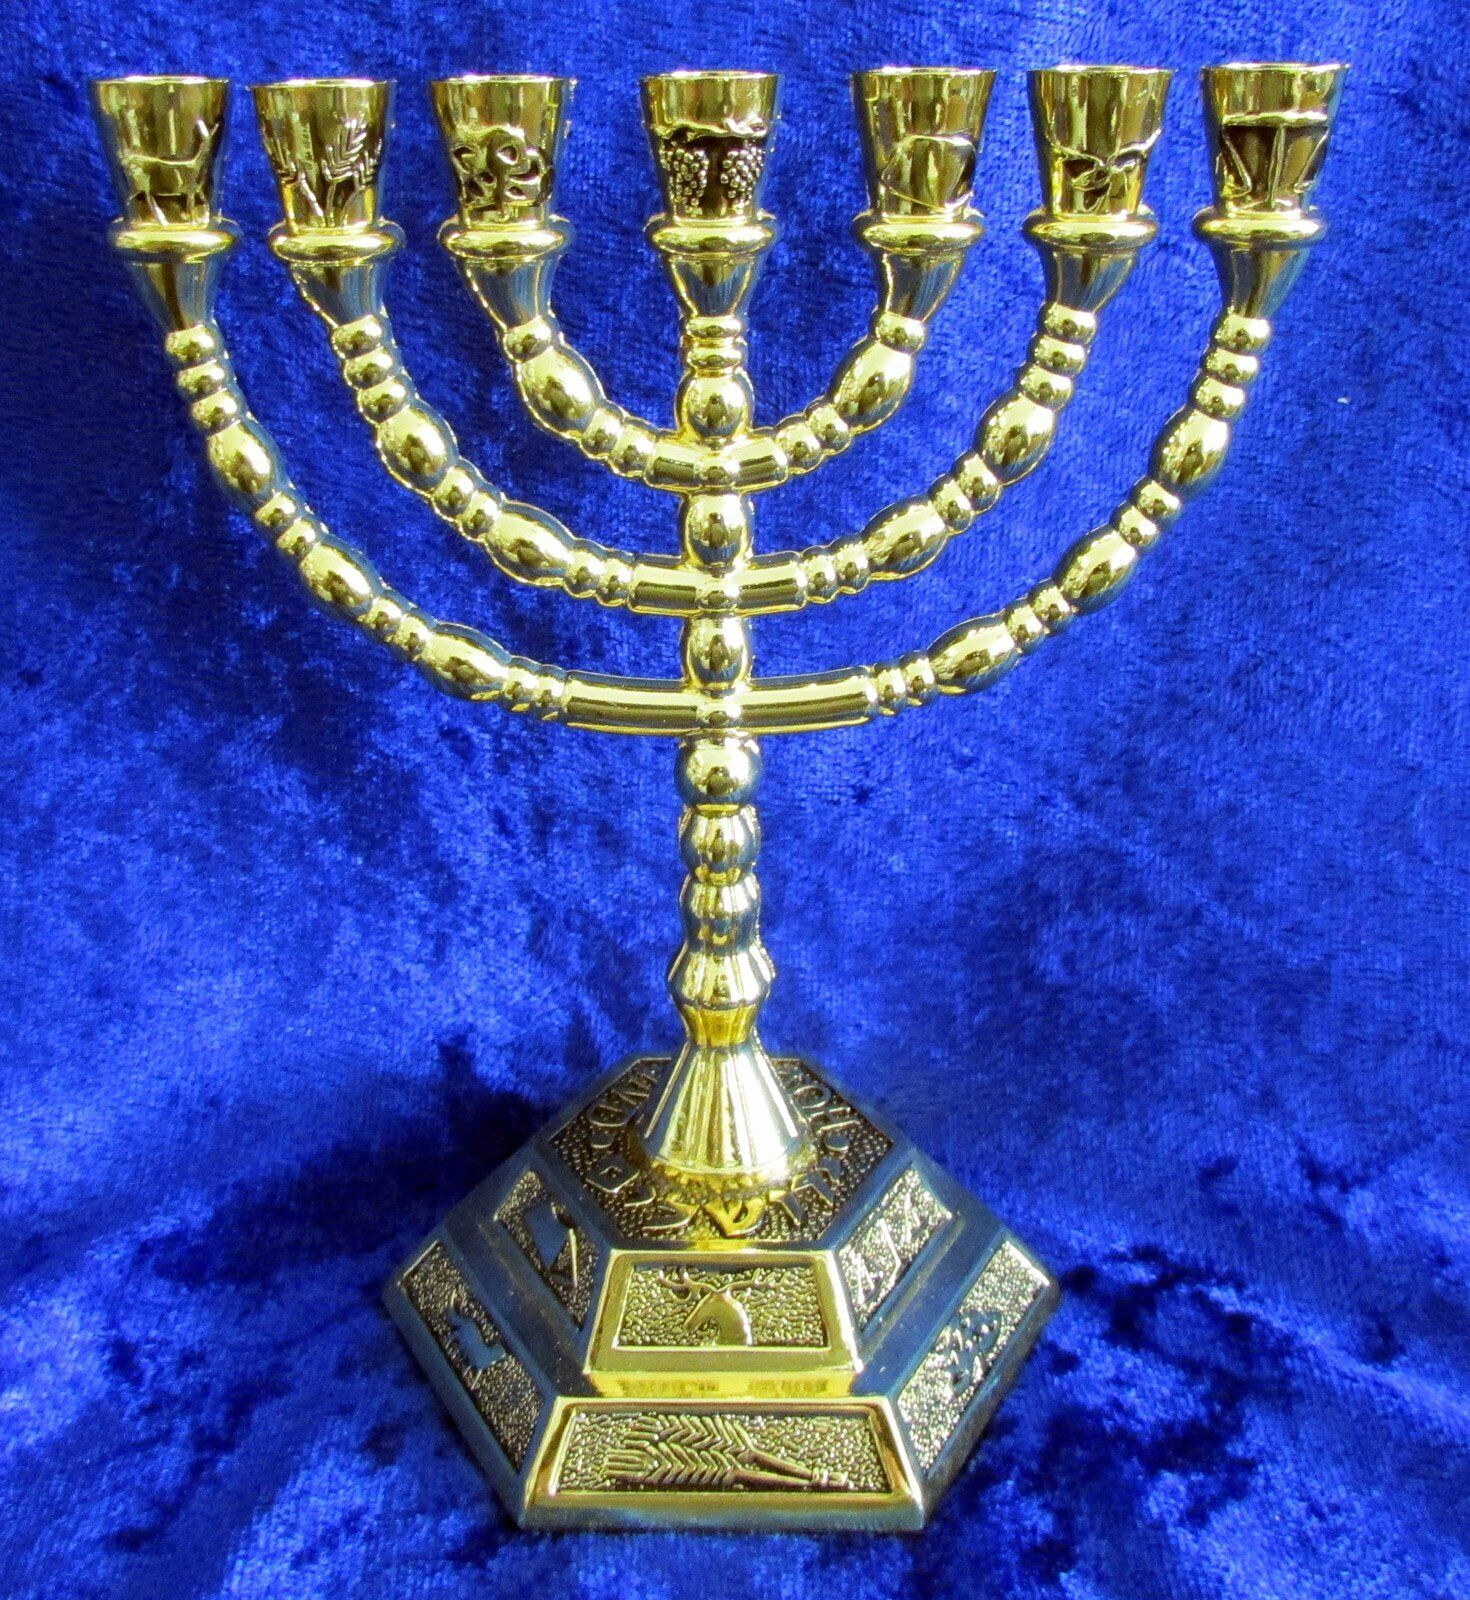 12 Tribes of Israel Jerusalem Temple Menorah - Gold 5 Inches